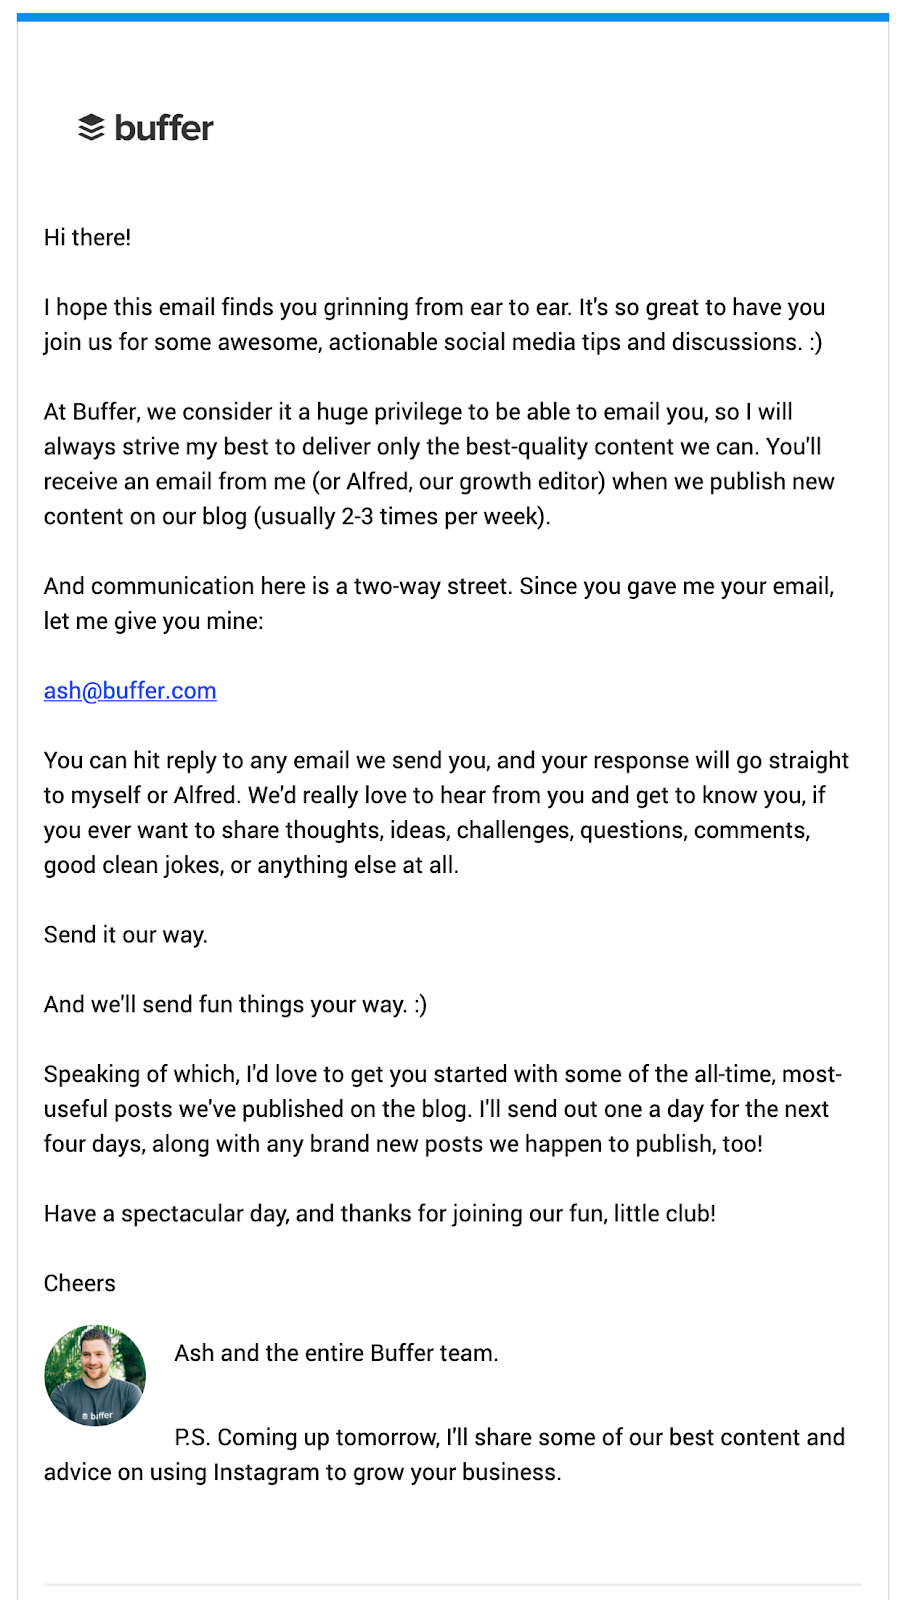 Screenshot of email from Buffer